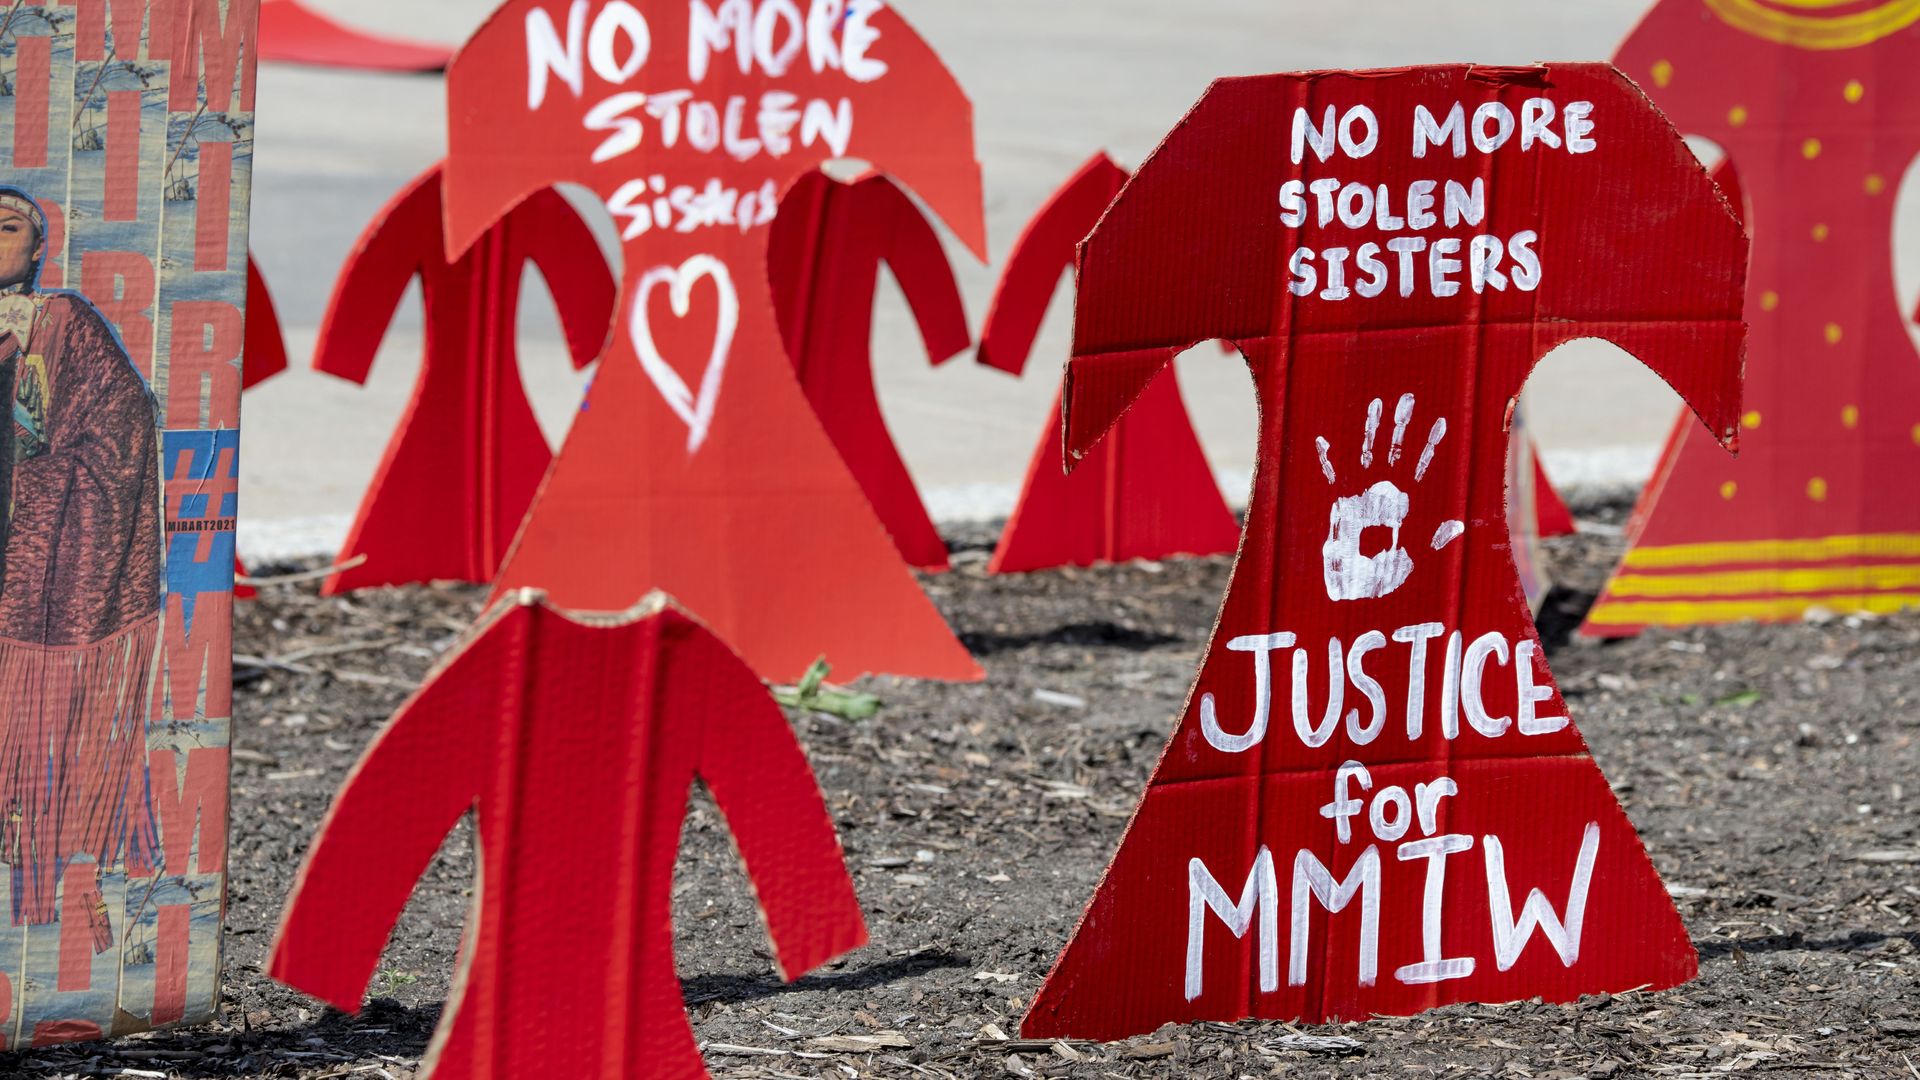 Photo of red signs that say "No more stolen sisters, justice for MMIW"